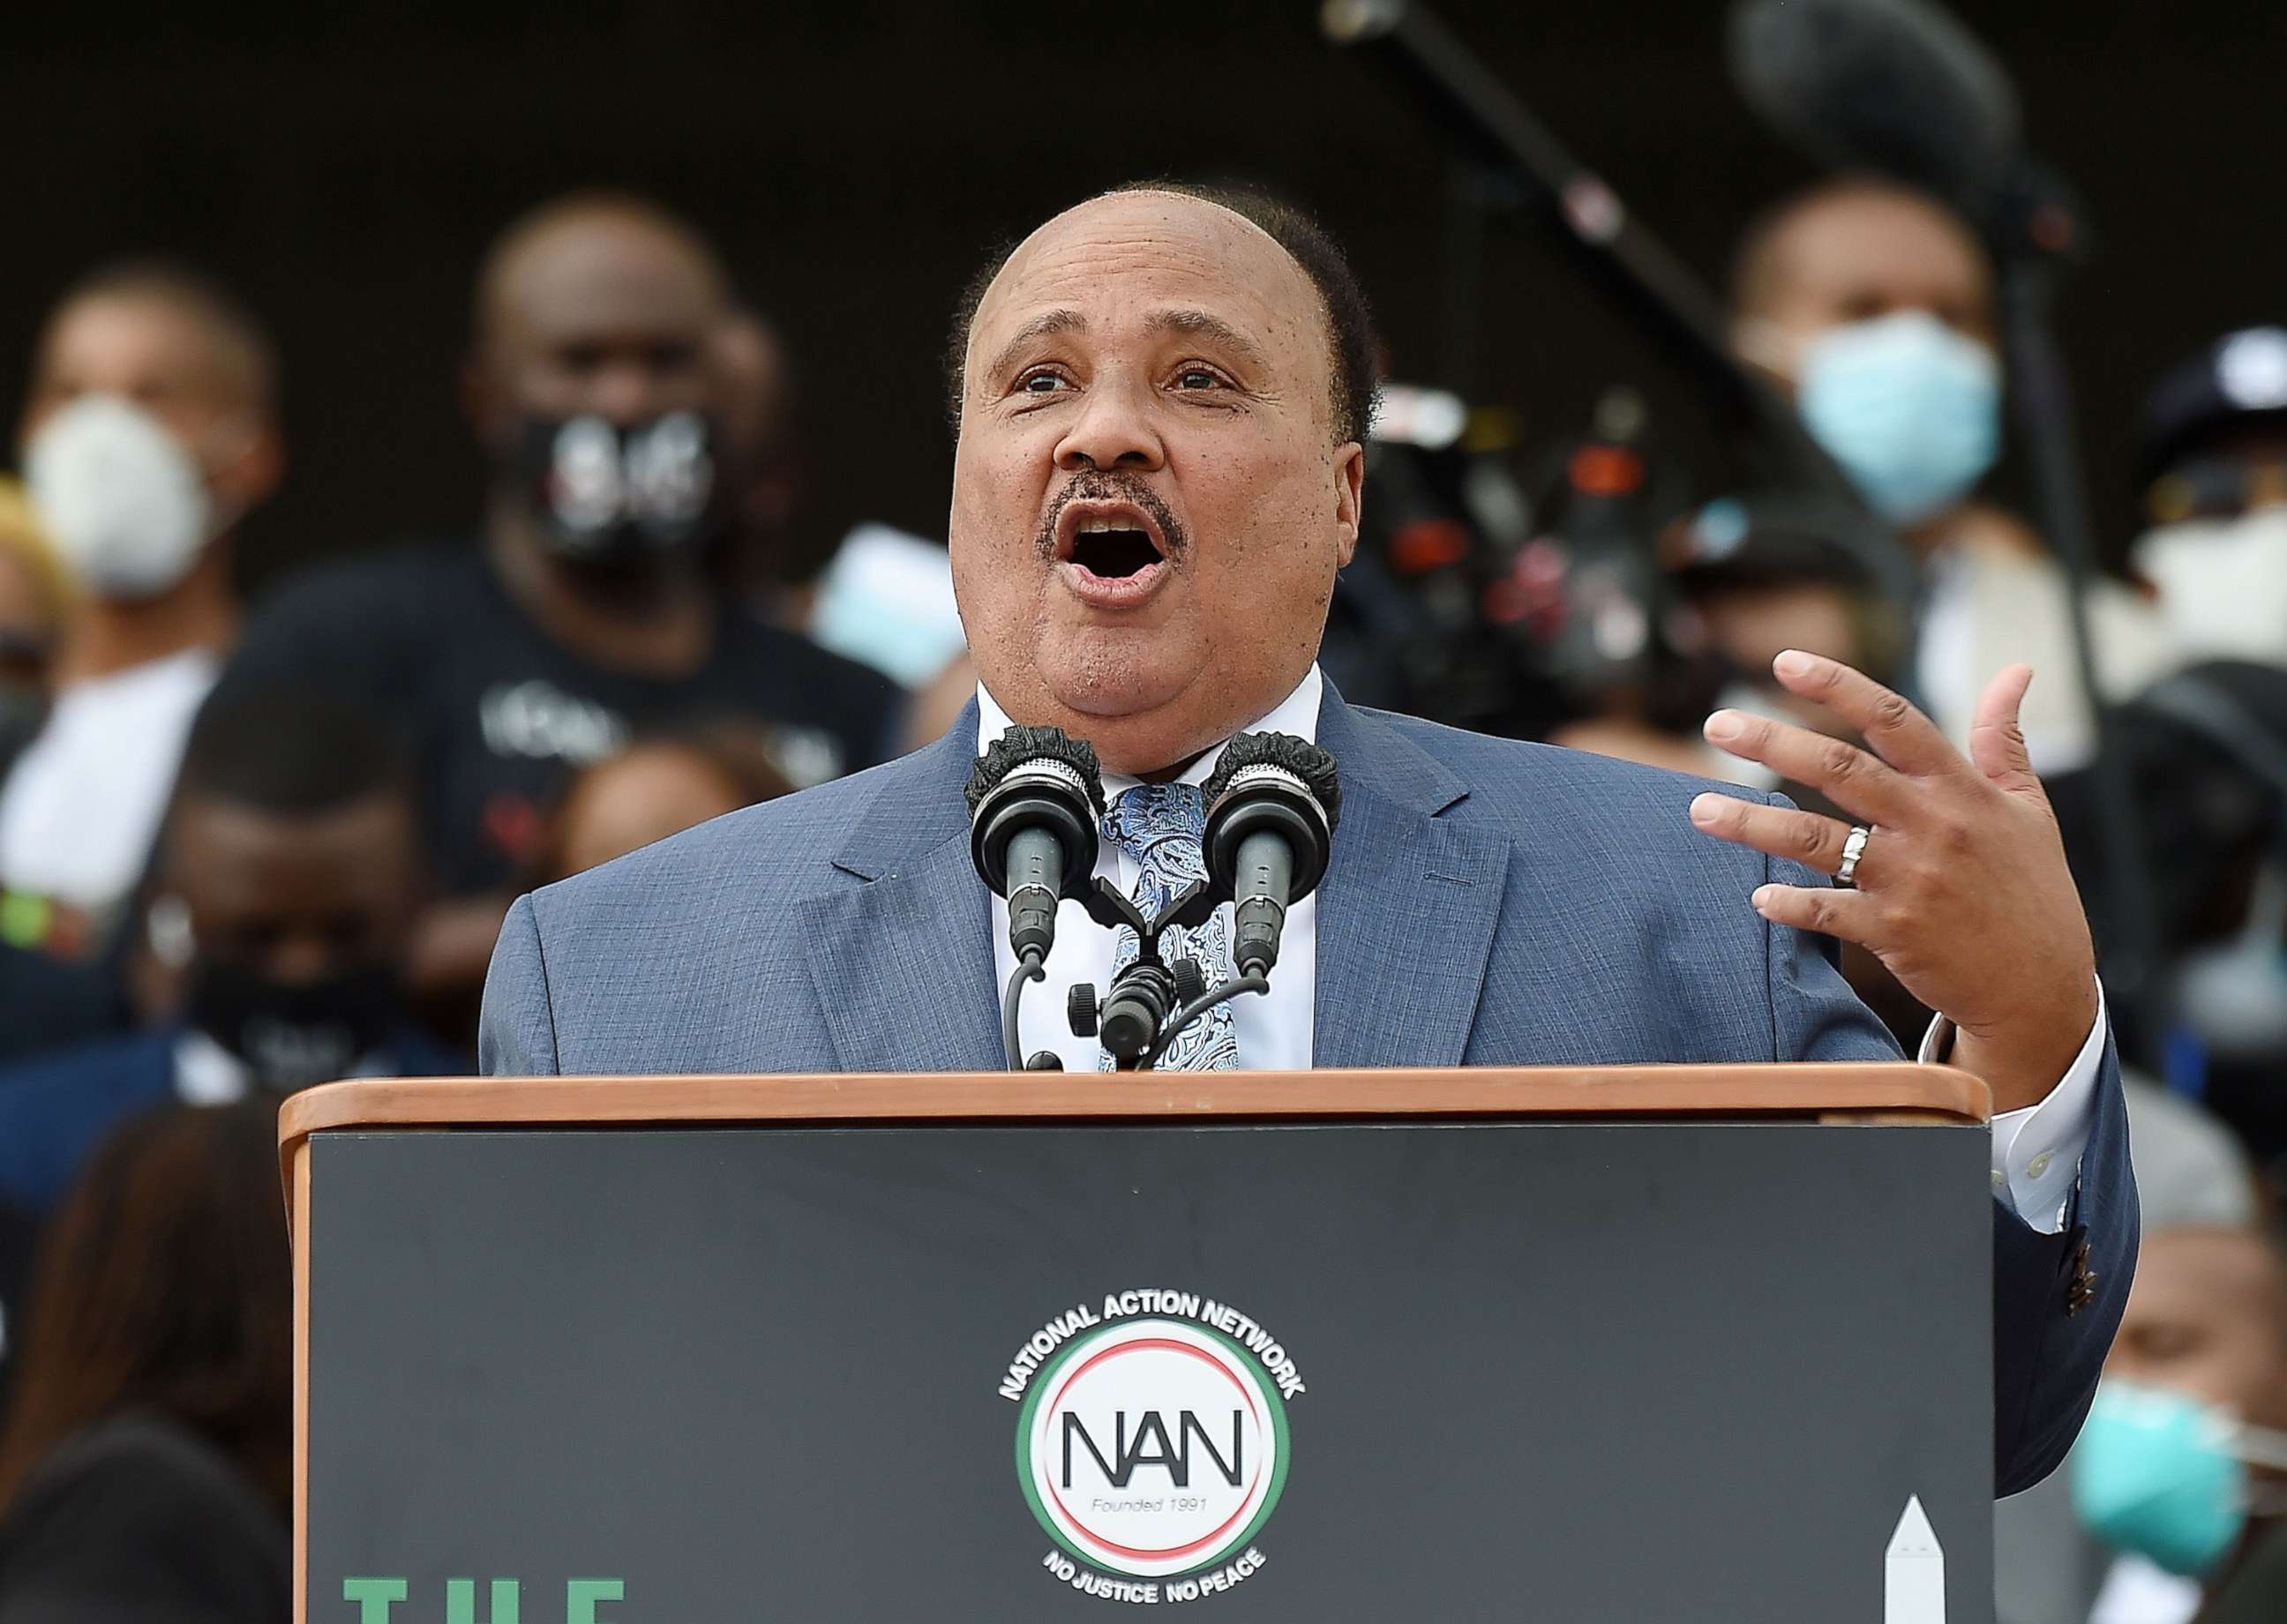 PHOTO: Human Rights Advocate Martin Luther King III speaks at the Lincoln Memorial during the"Commitment March: Get Your Knee Off Our Necks," Aug. 28, 2020, in Washington D.C.